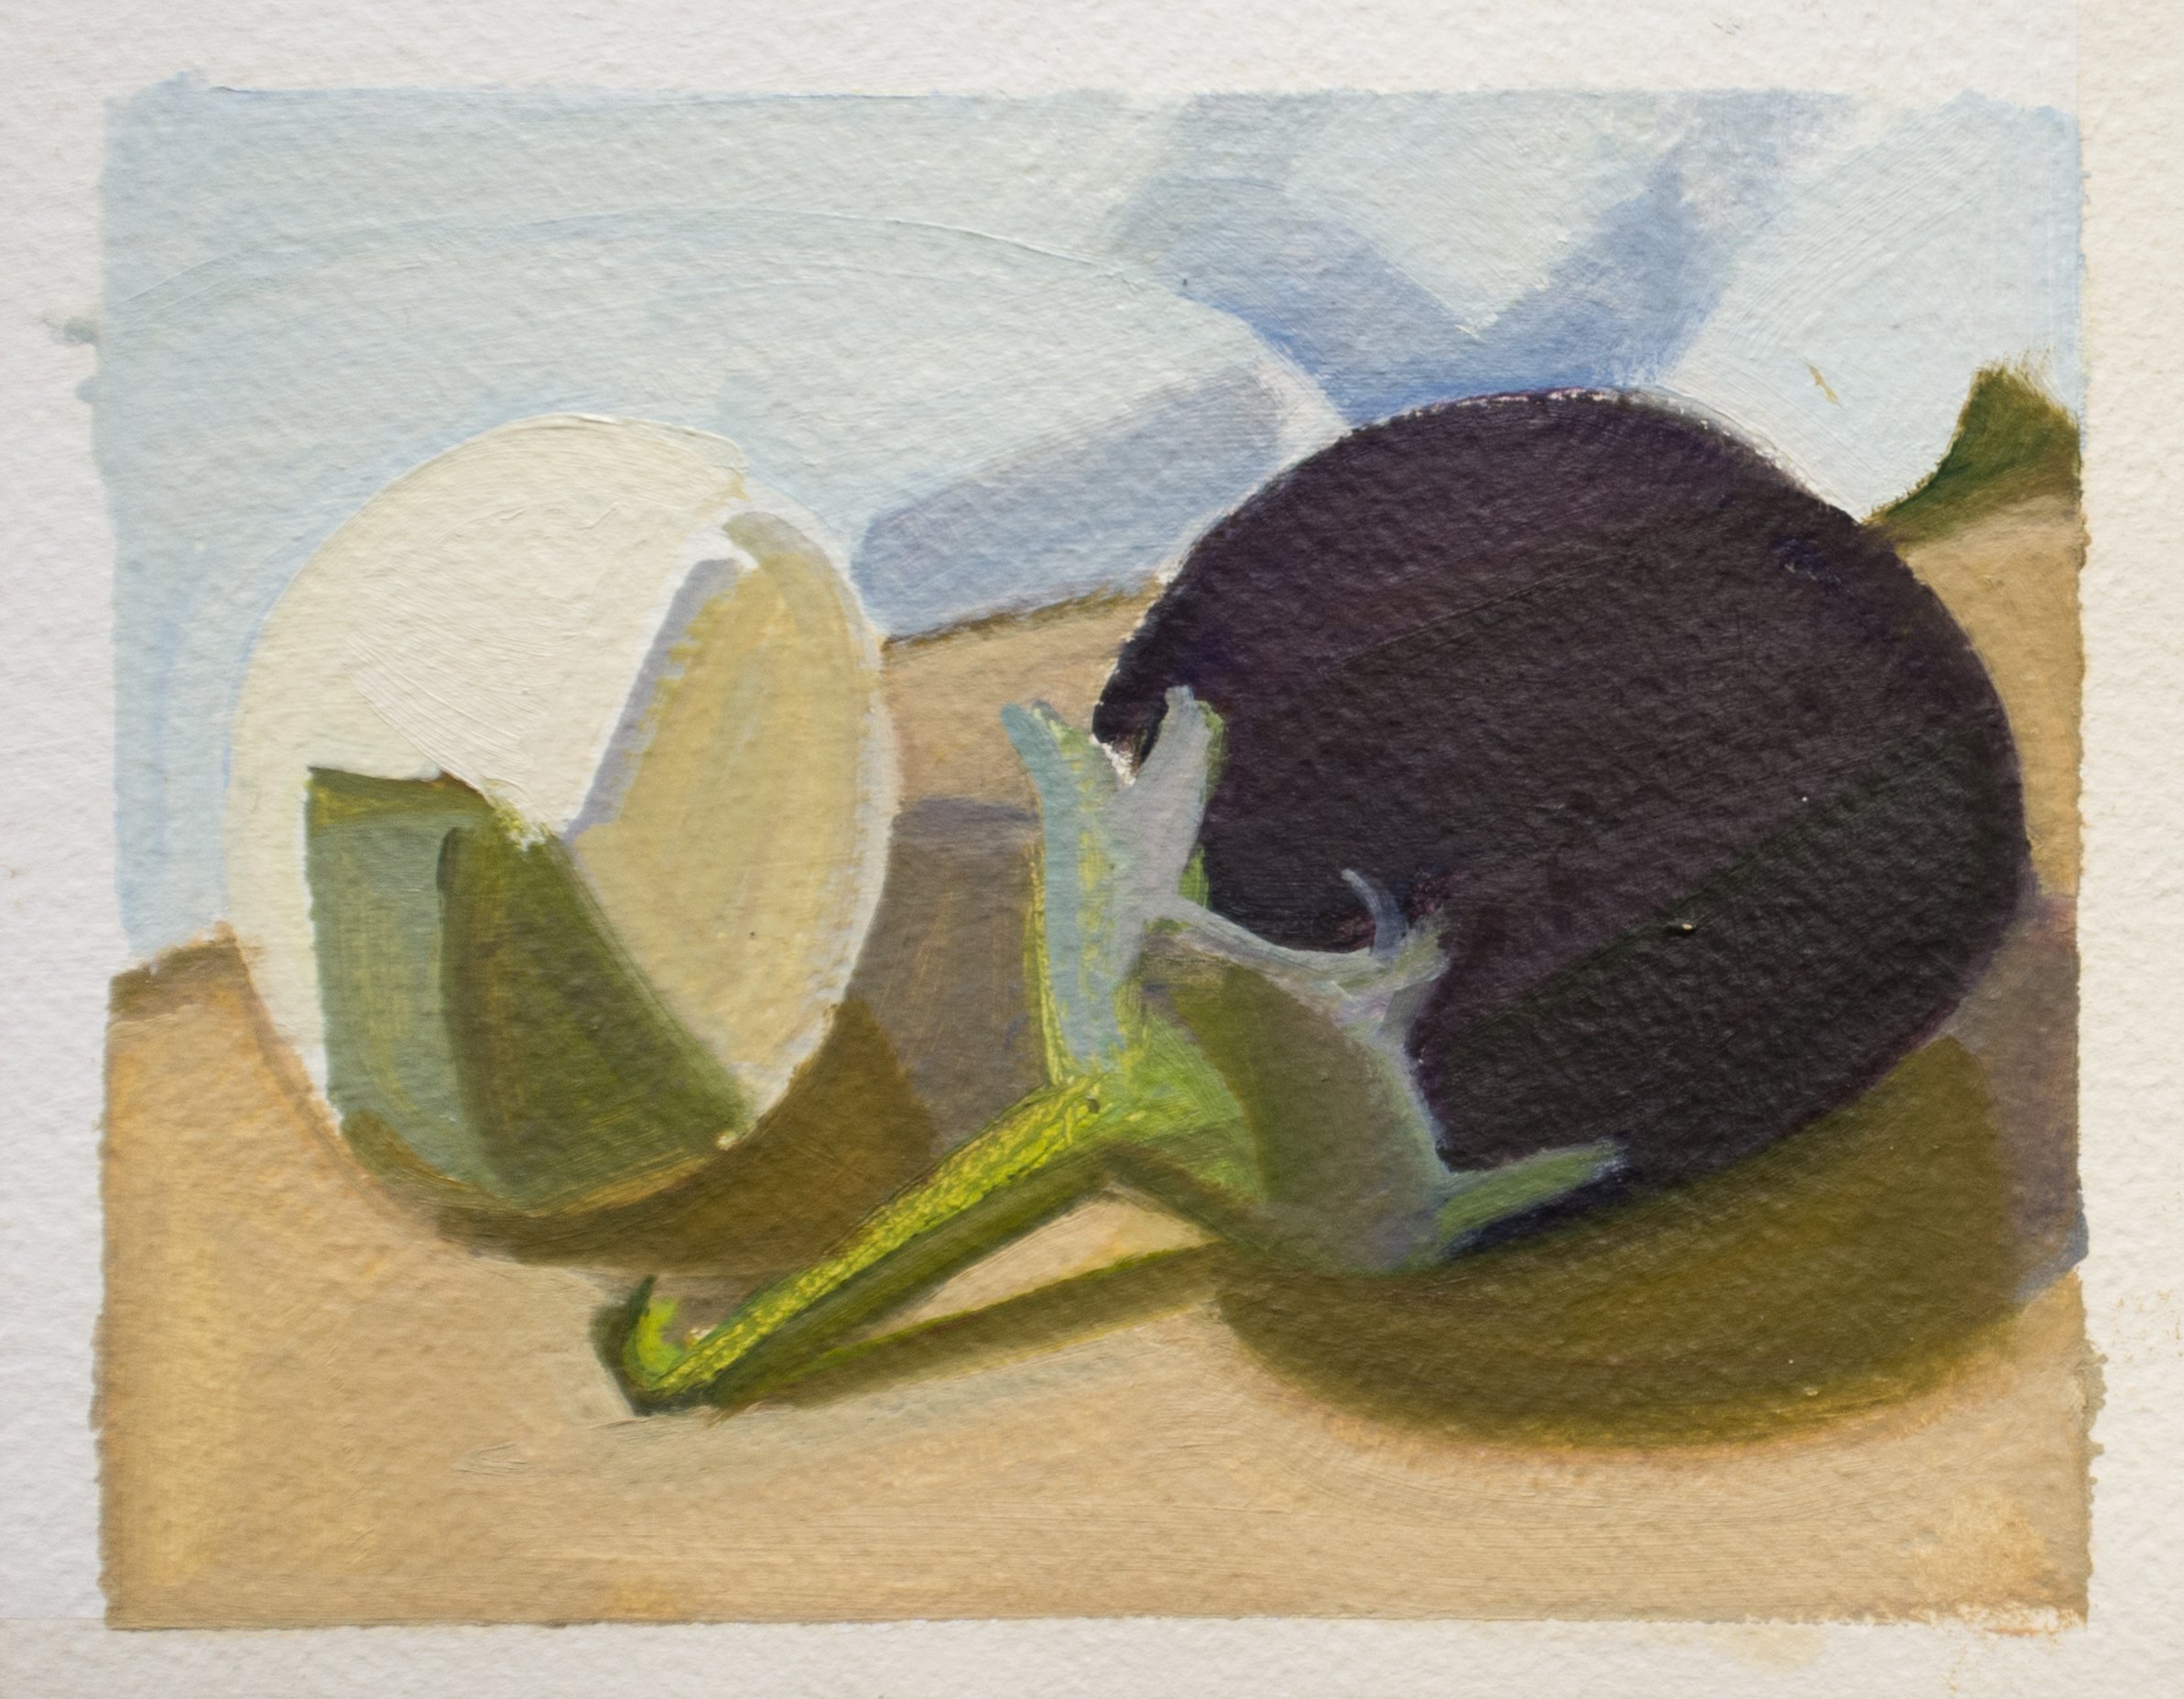   Two Eggplants, One White , c. 2007, oil/paper unframed, 6” x 8 in. (Private collection) 